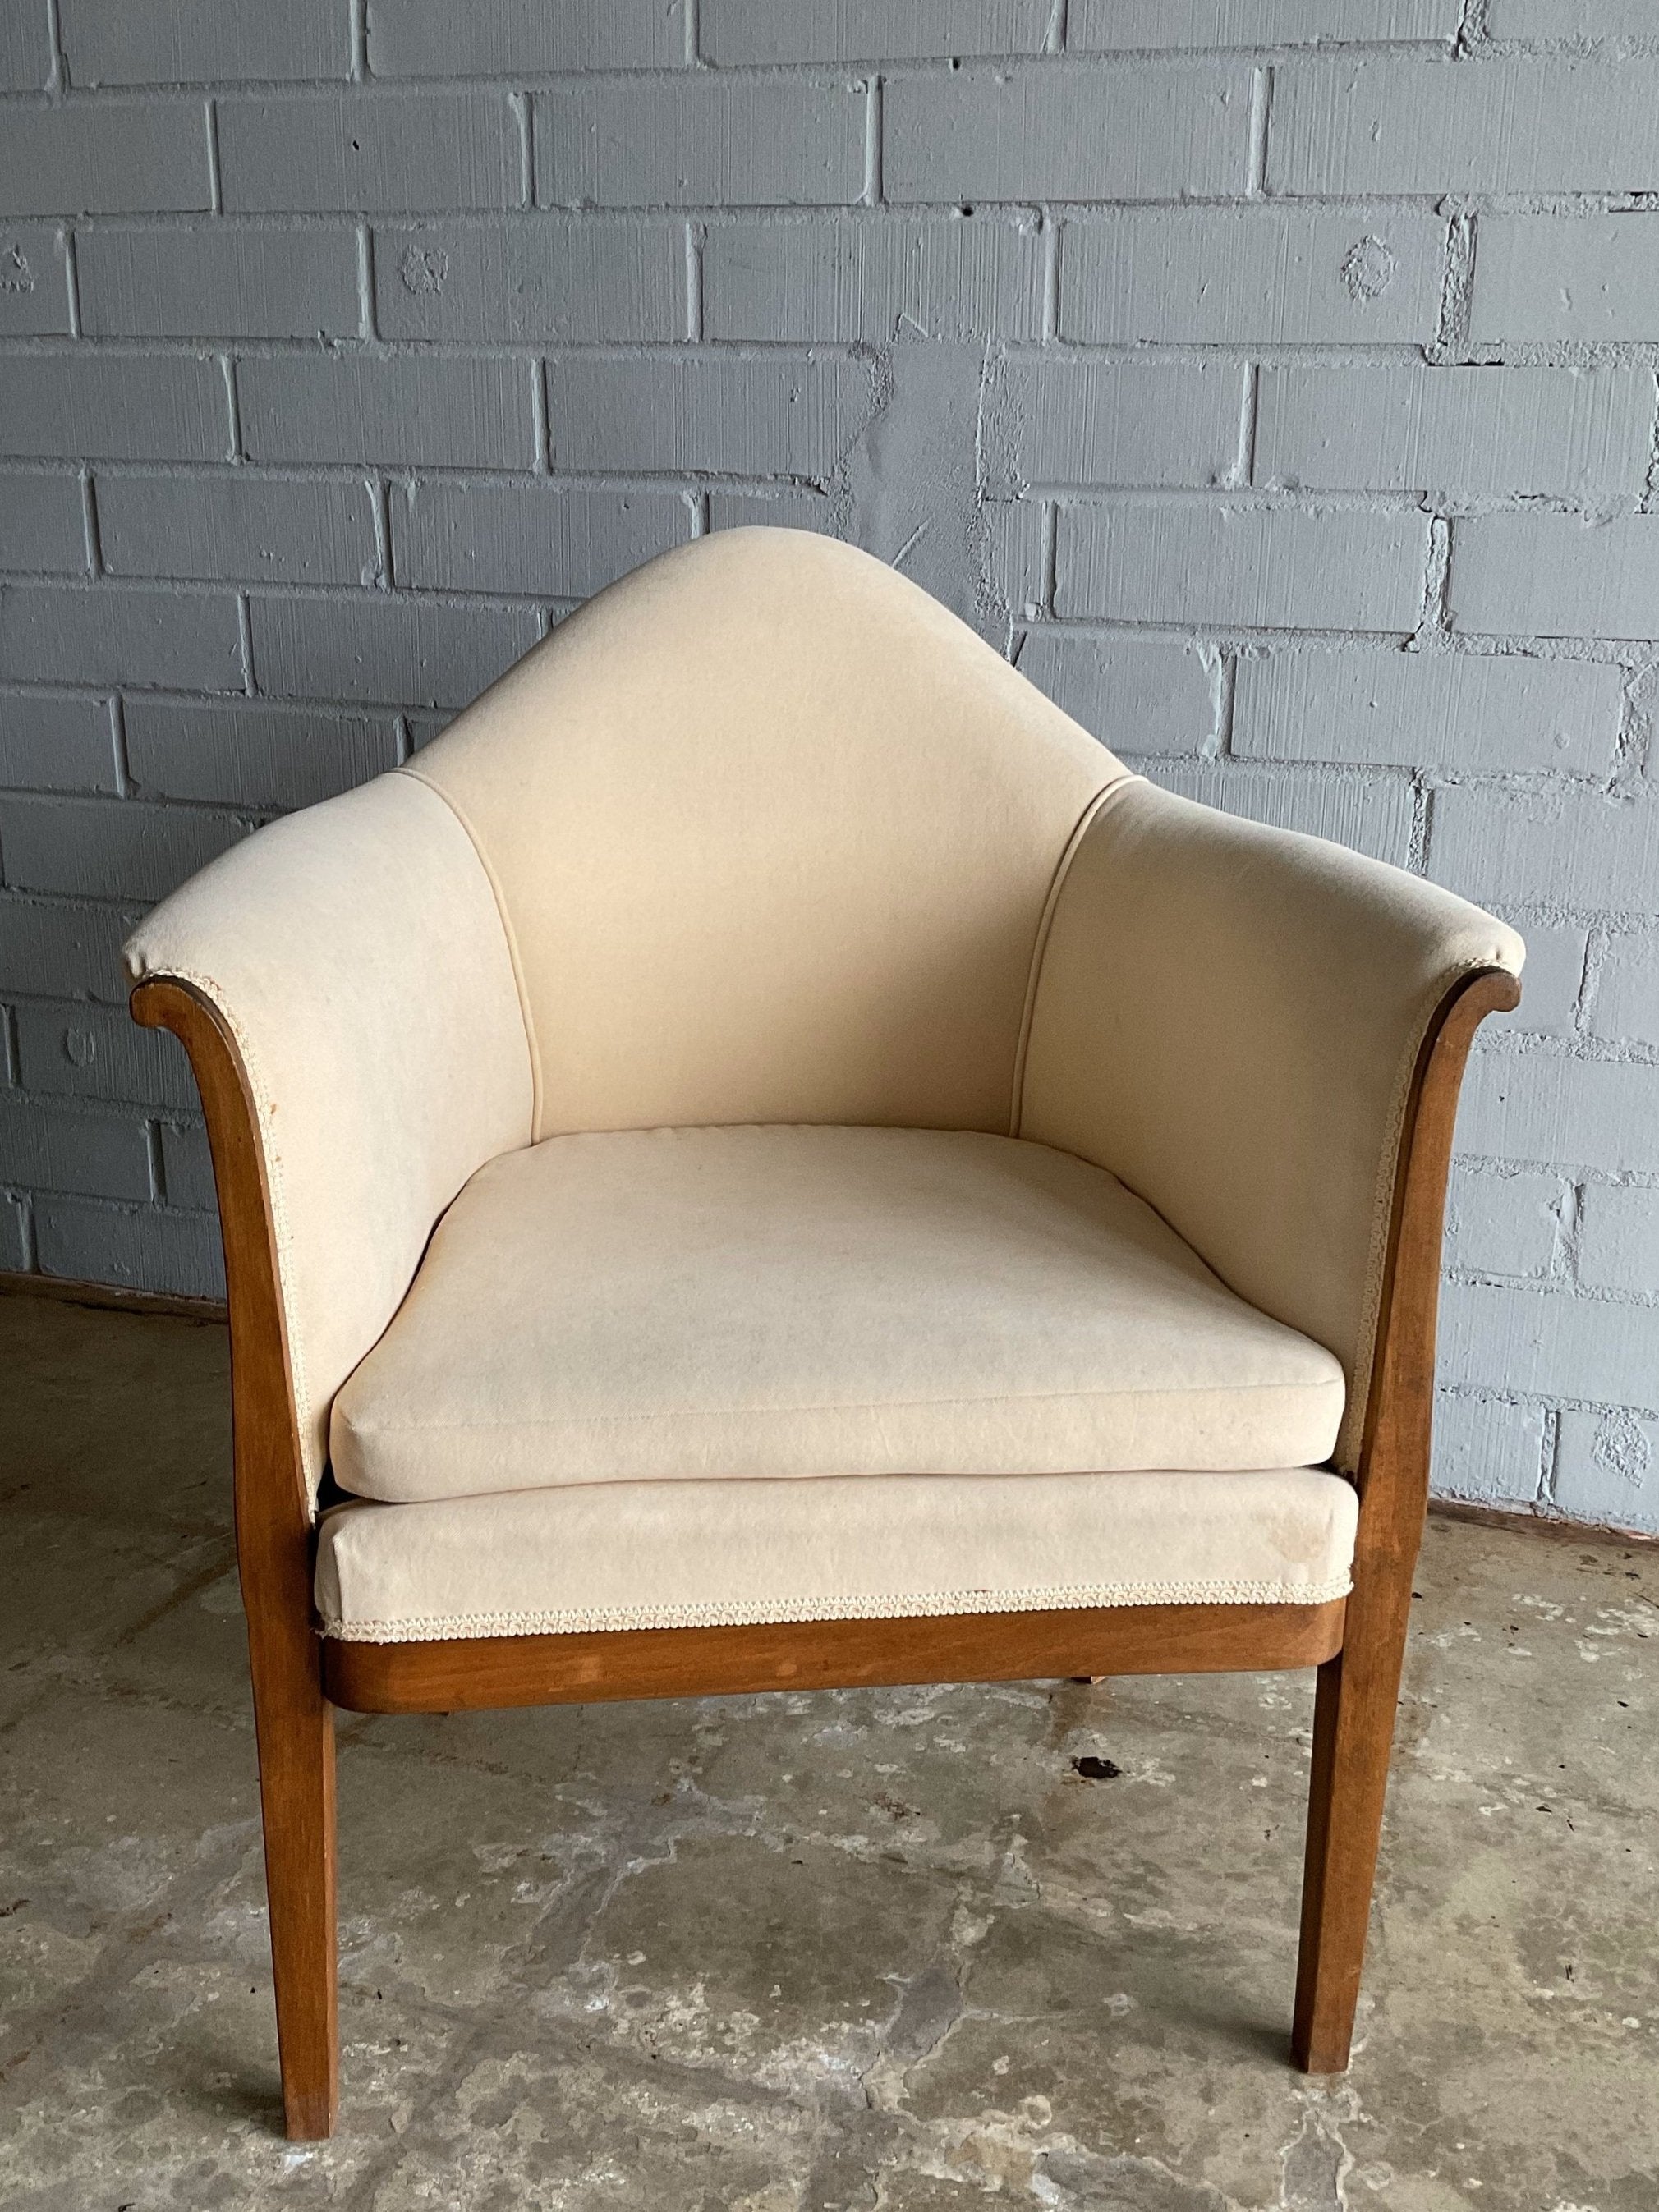 PAIR OF FRENCH CREAM UPHOLSTERED CHAIRS